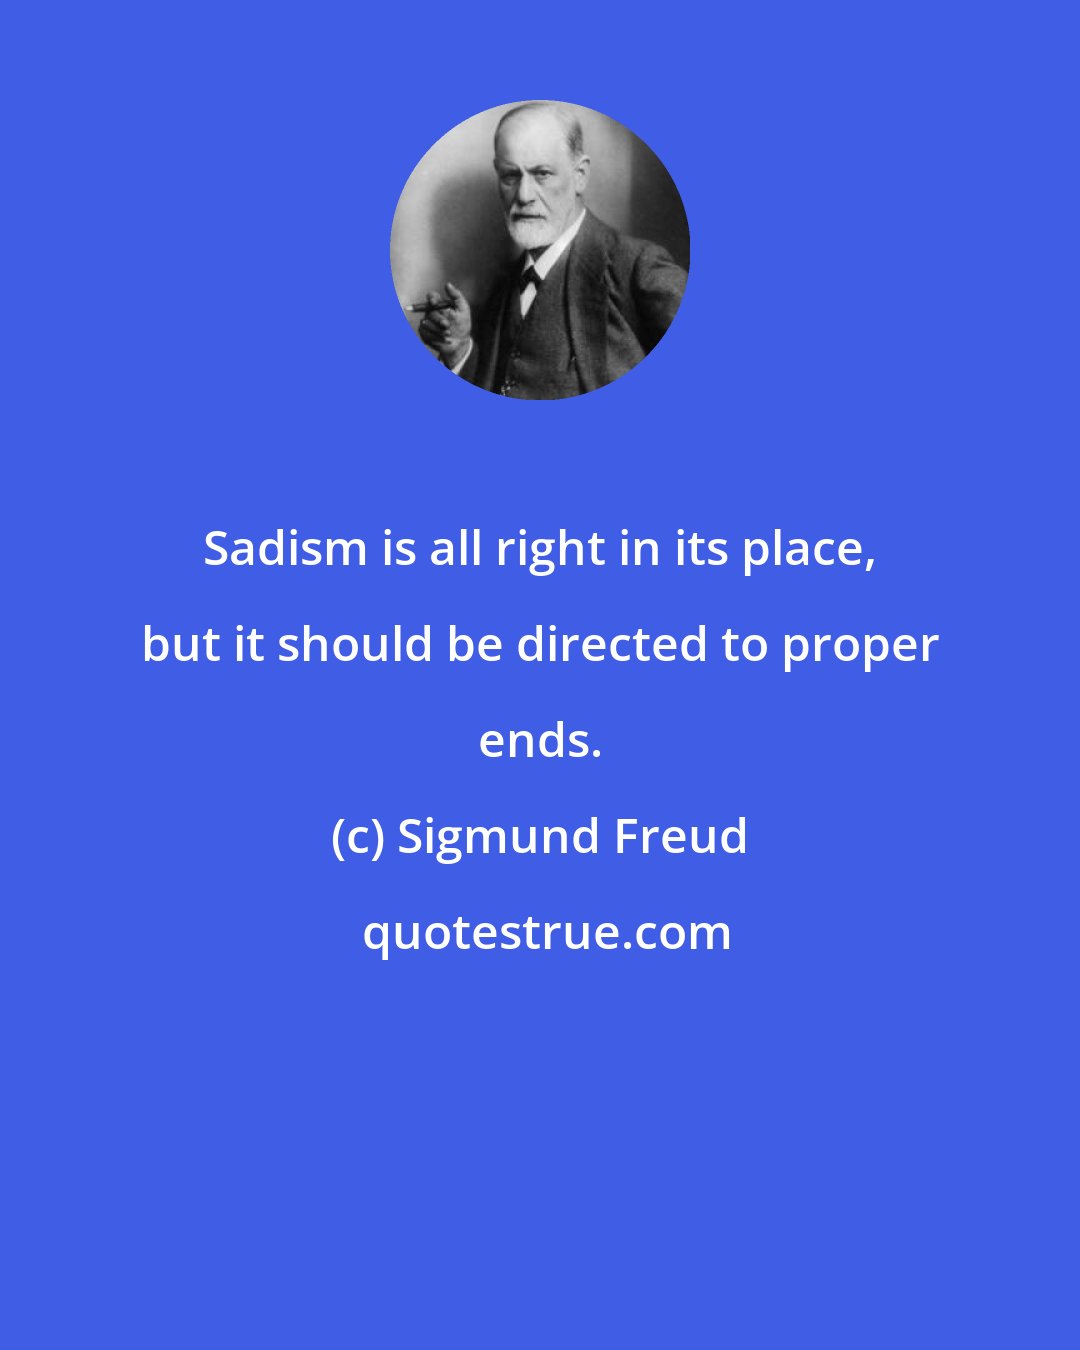 Sigmund Freud: Sadism is all right in its place, but it should be directed to proper ends.